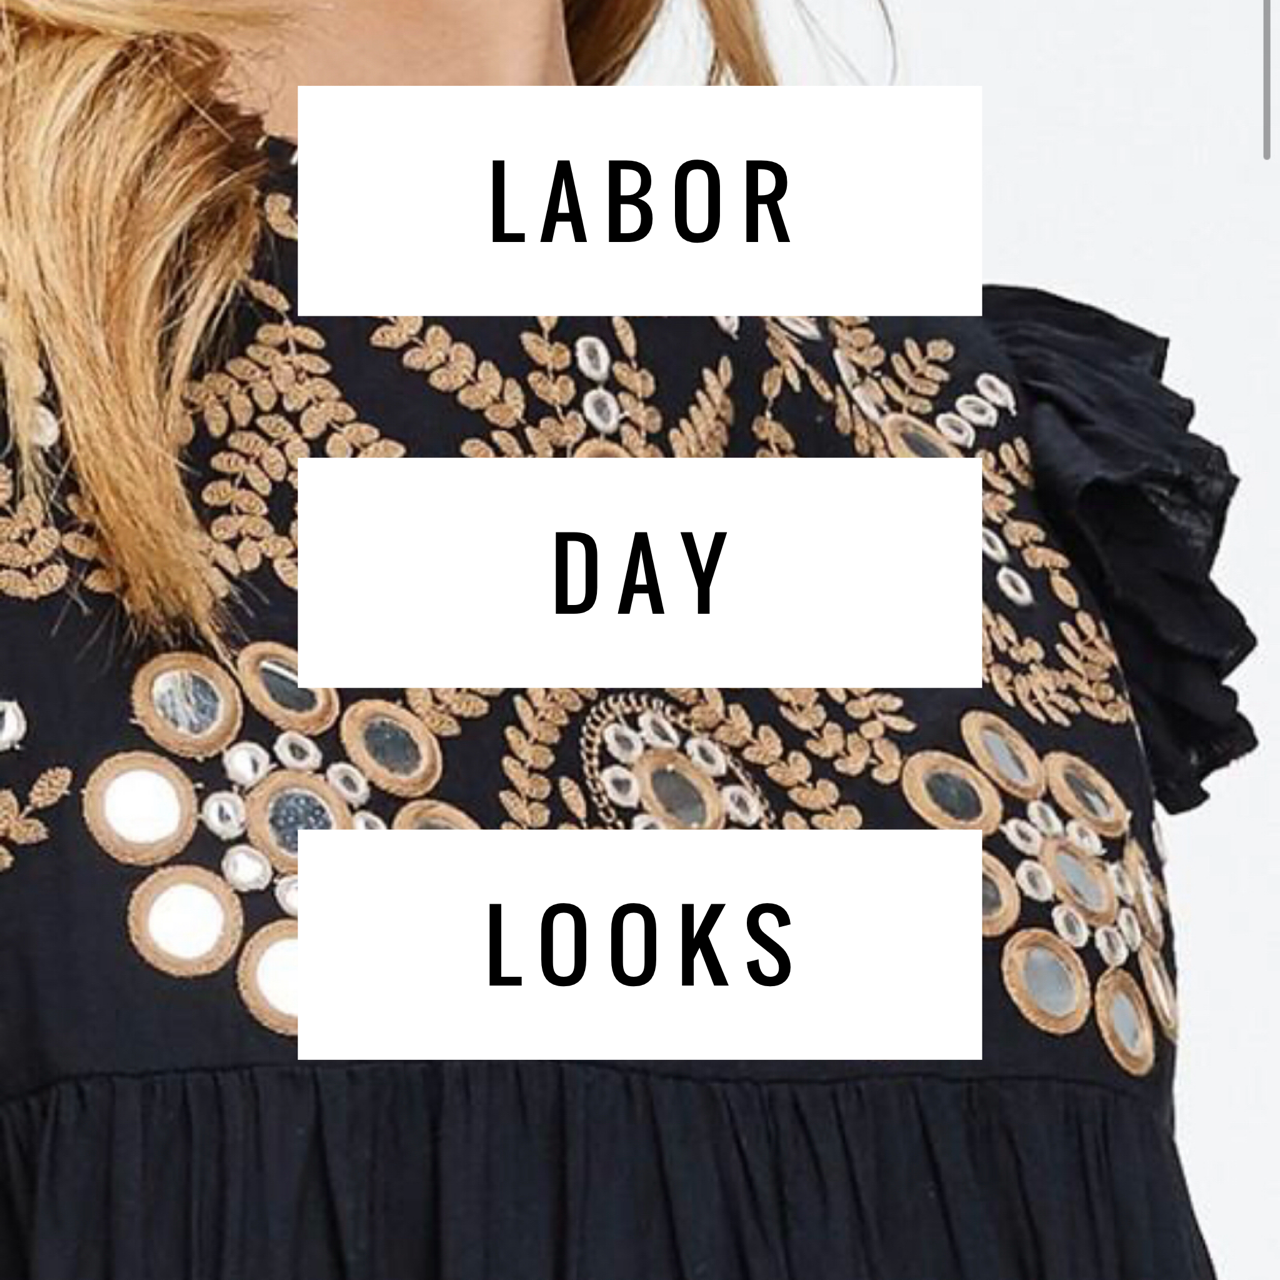 LABOR DAY LOOKS YOU'LL LOVE